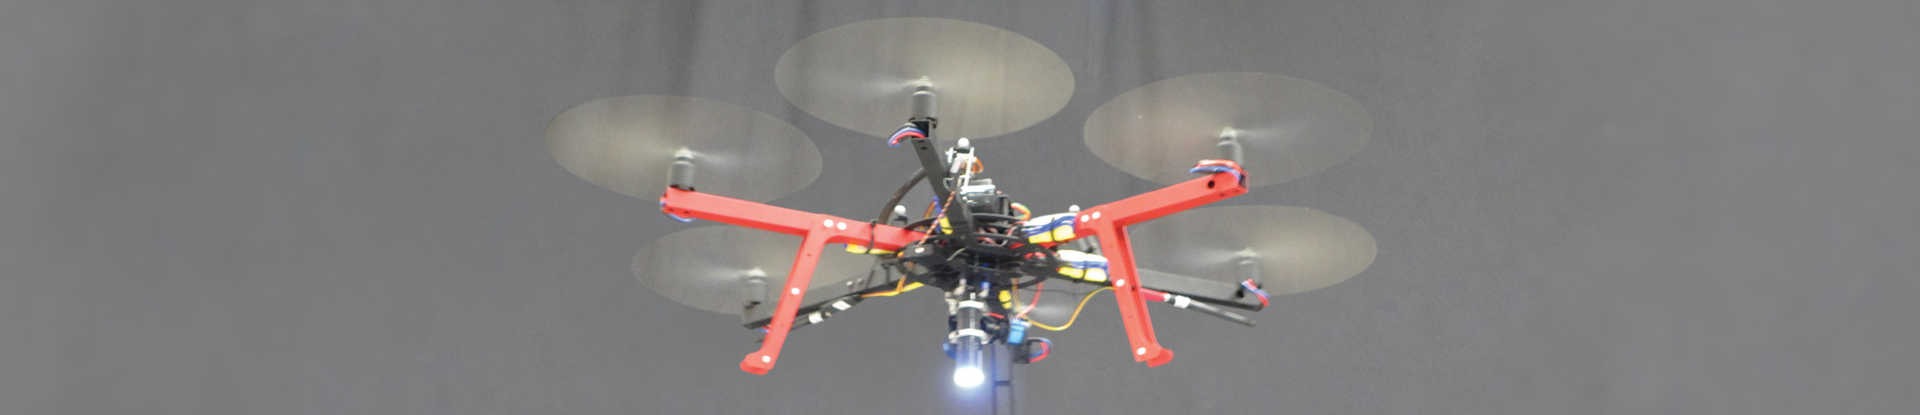 UAS hovering with laser near photovoltaic cell